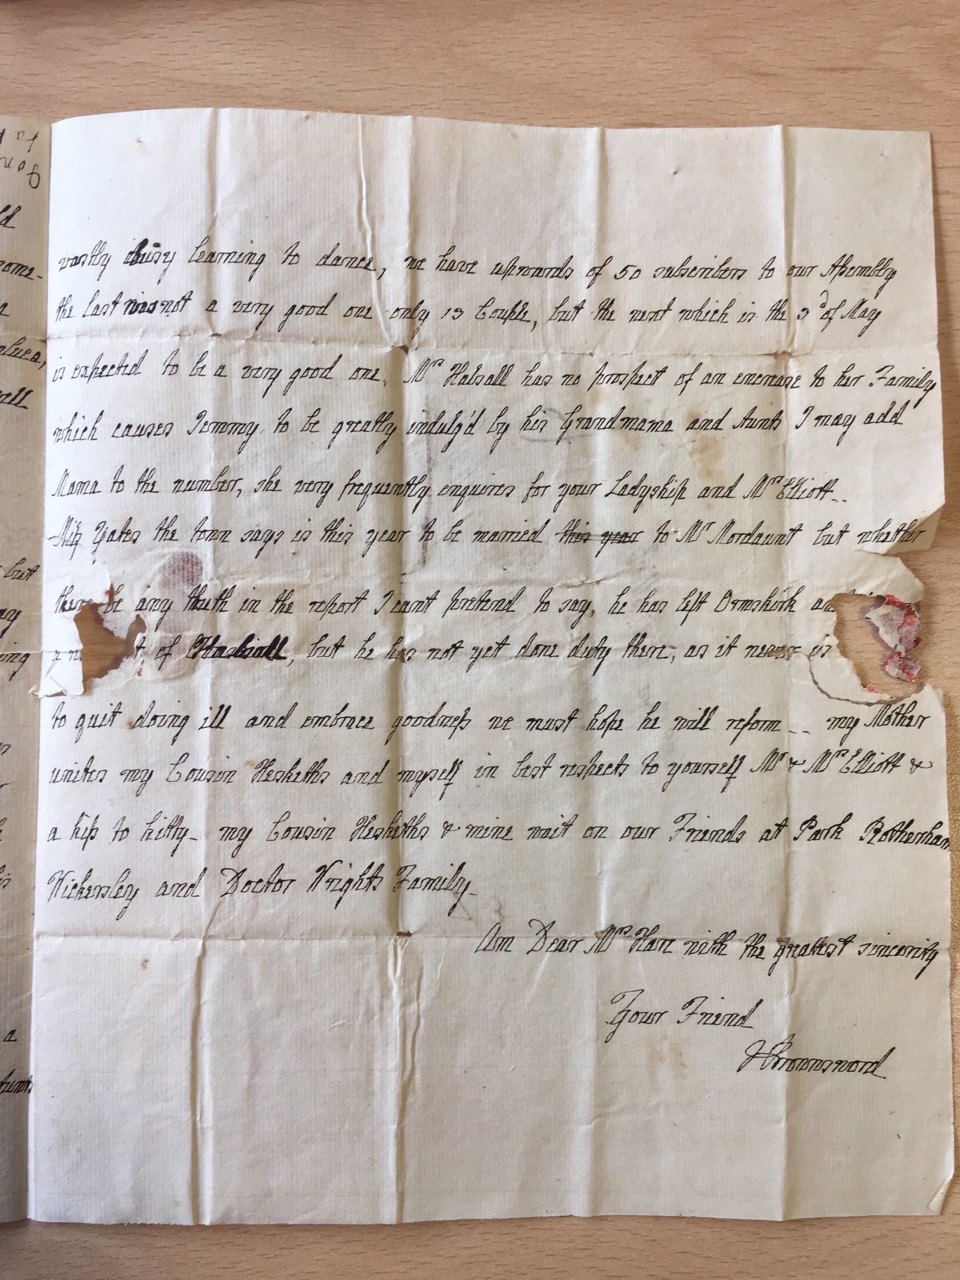 Image #3 of letter: J[enny] Brownsword to Ann Hare, 12 March 1773